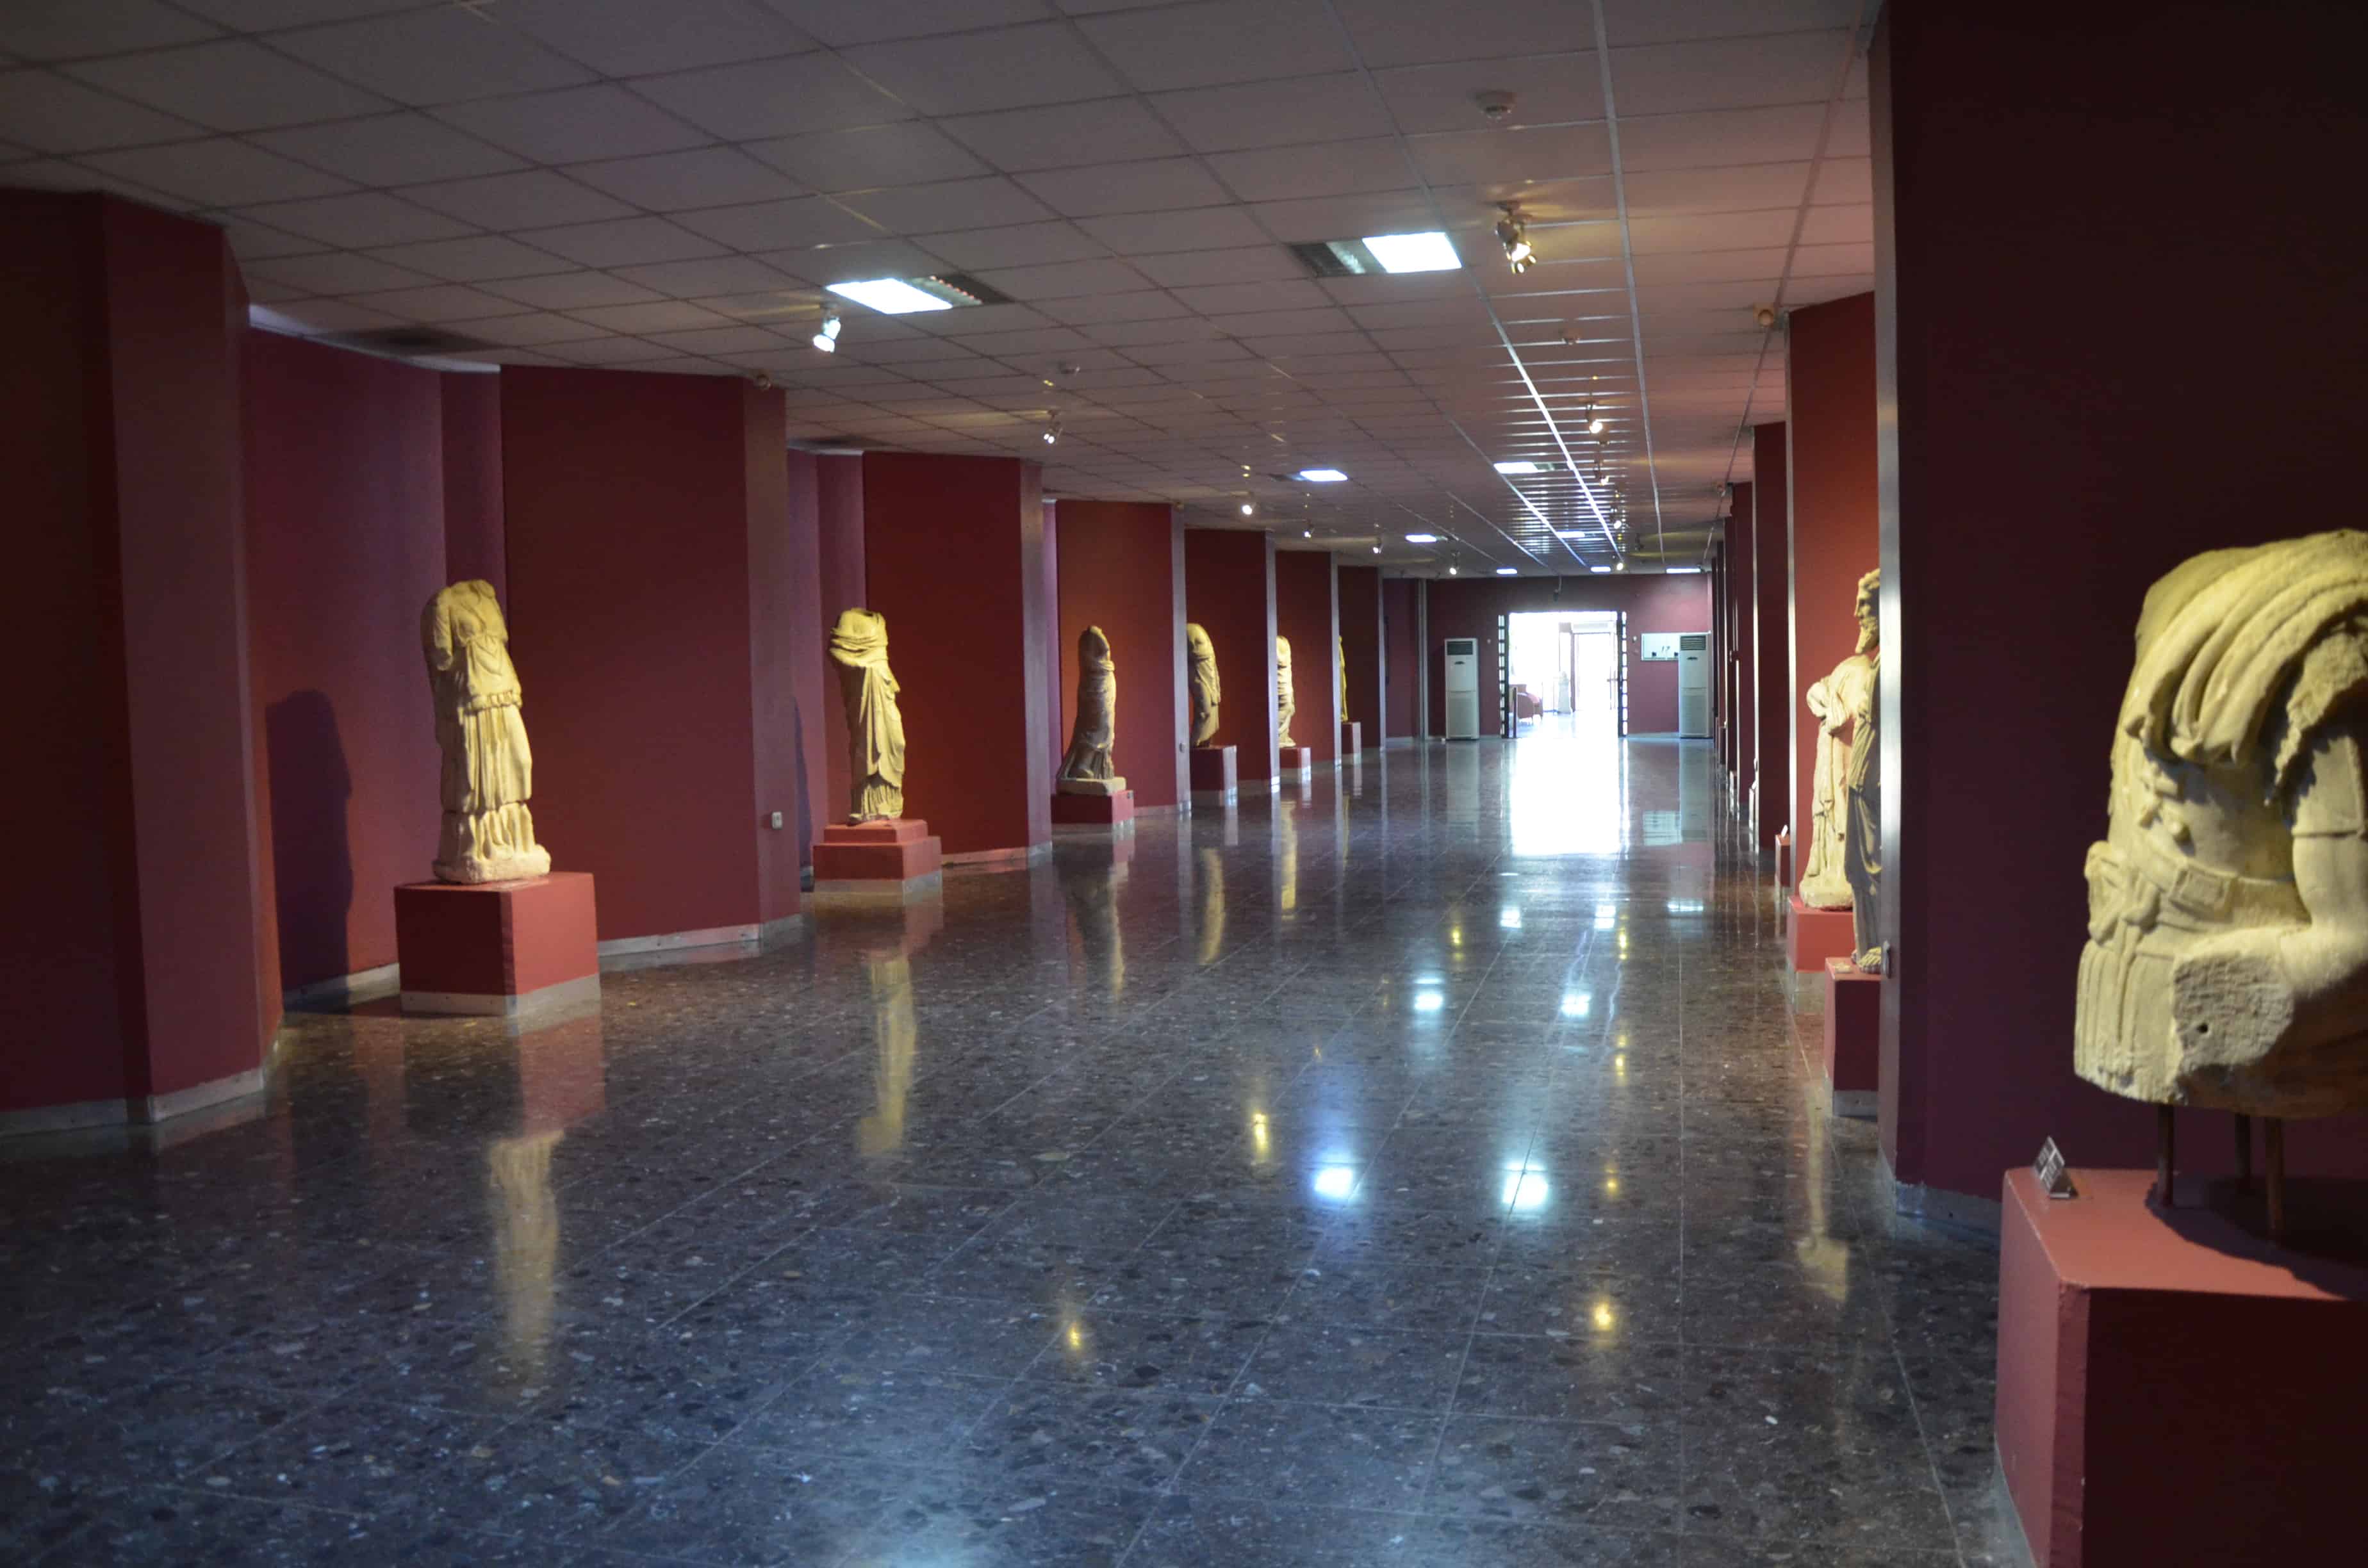 Gallery with statues at the Izmir Archaeology Museum in Izmir, Turkey